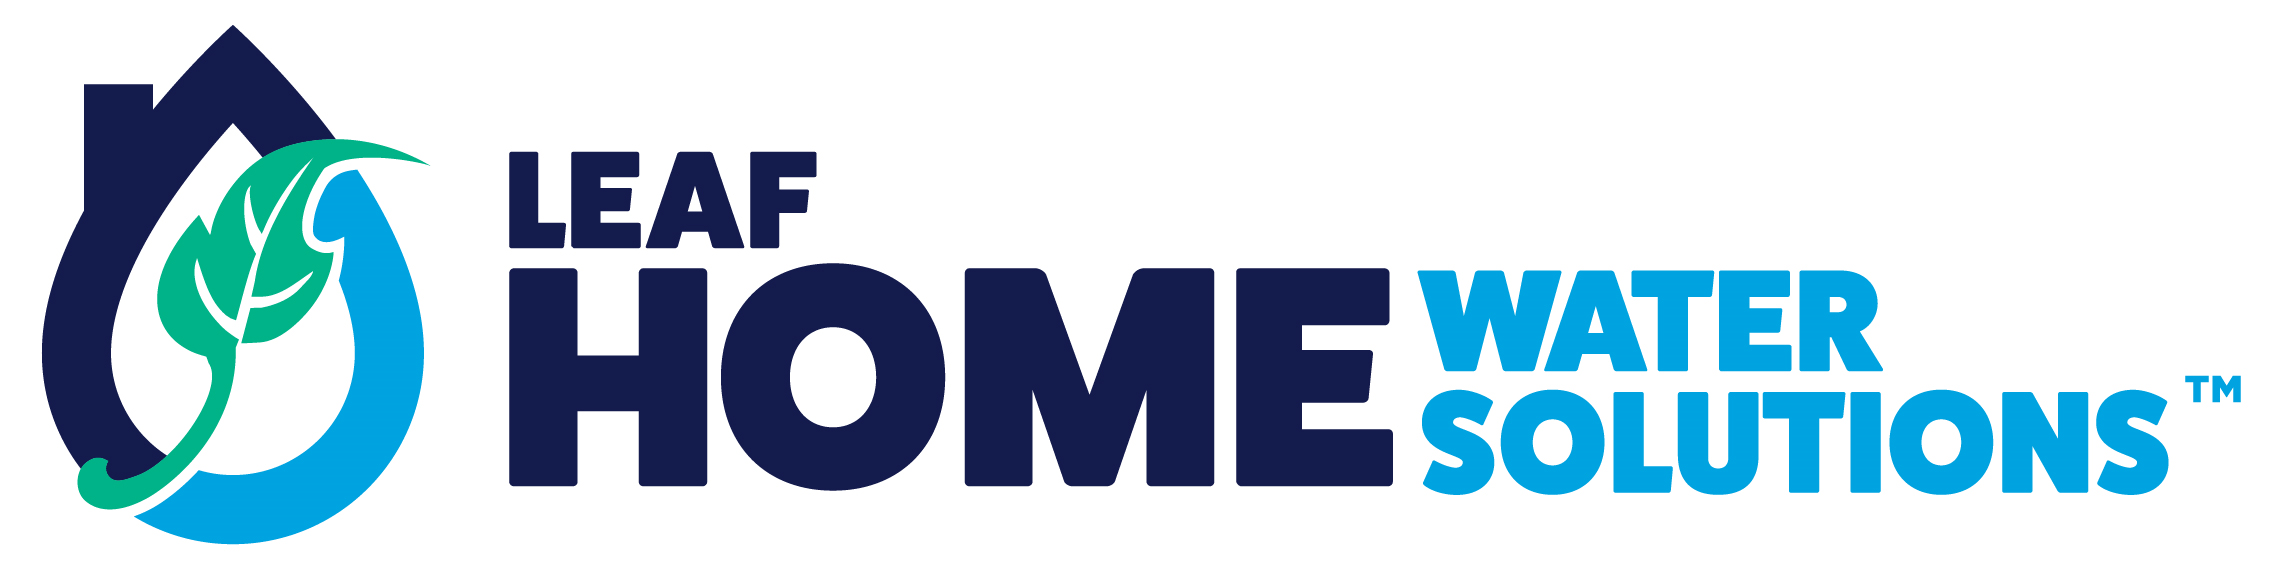 Leaf Home Water Solutions Logo